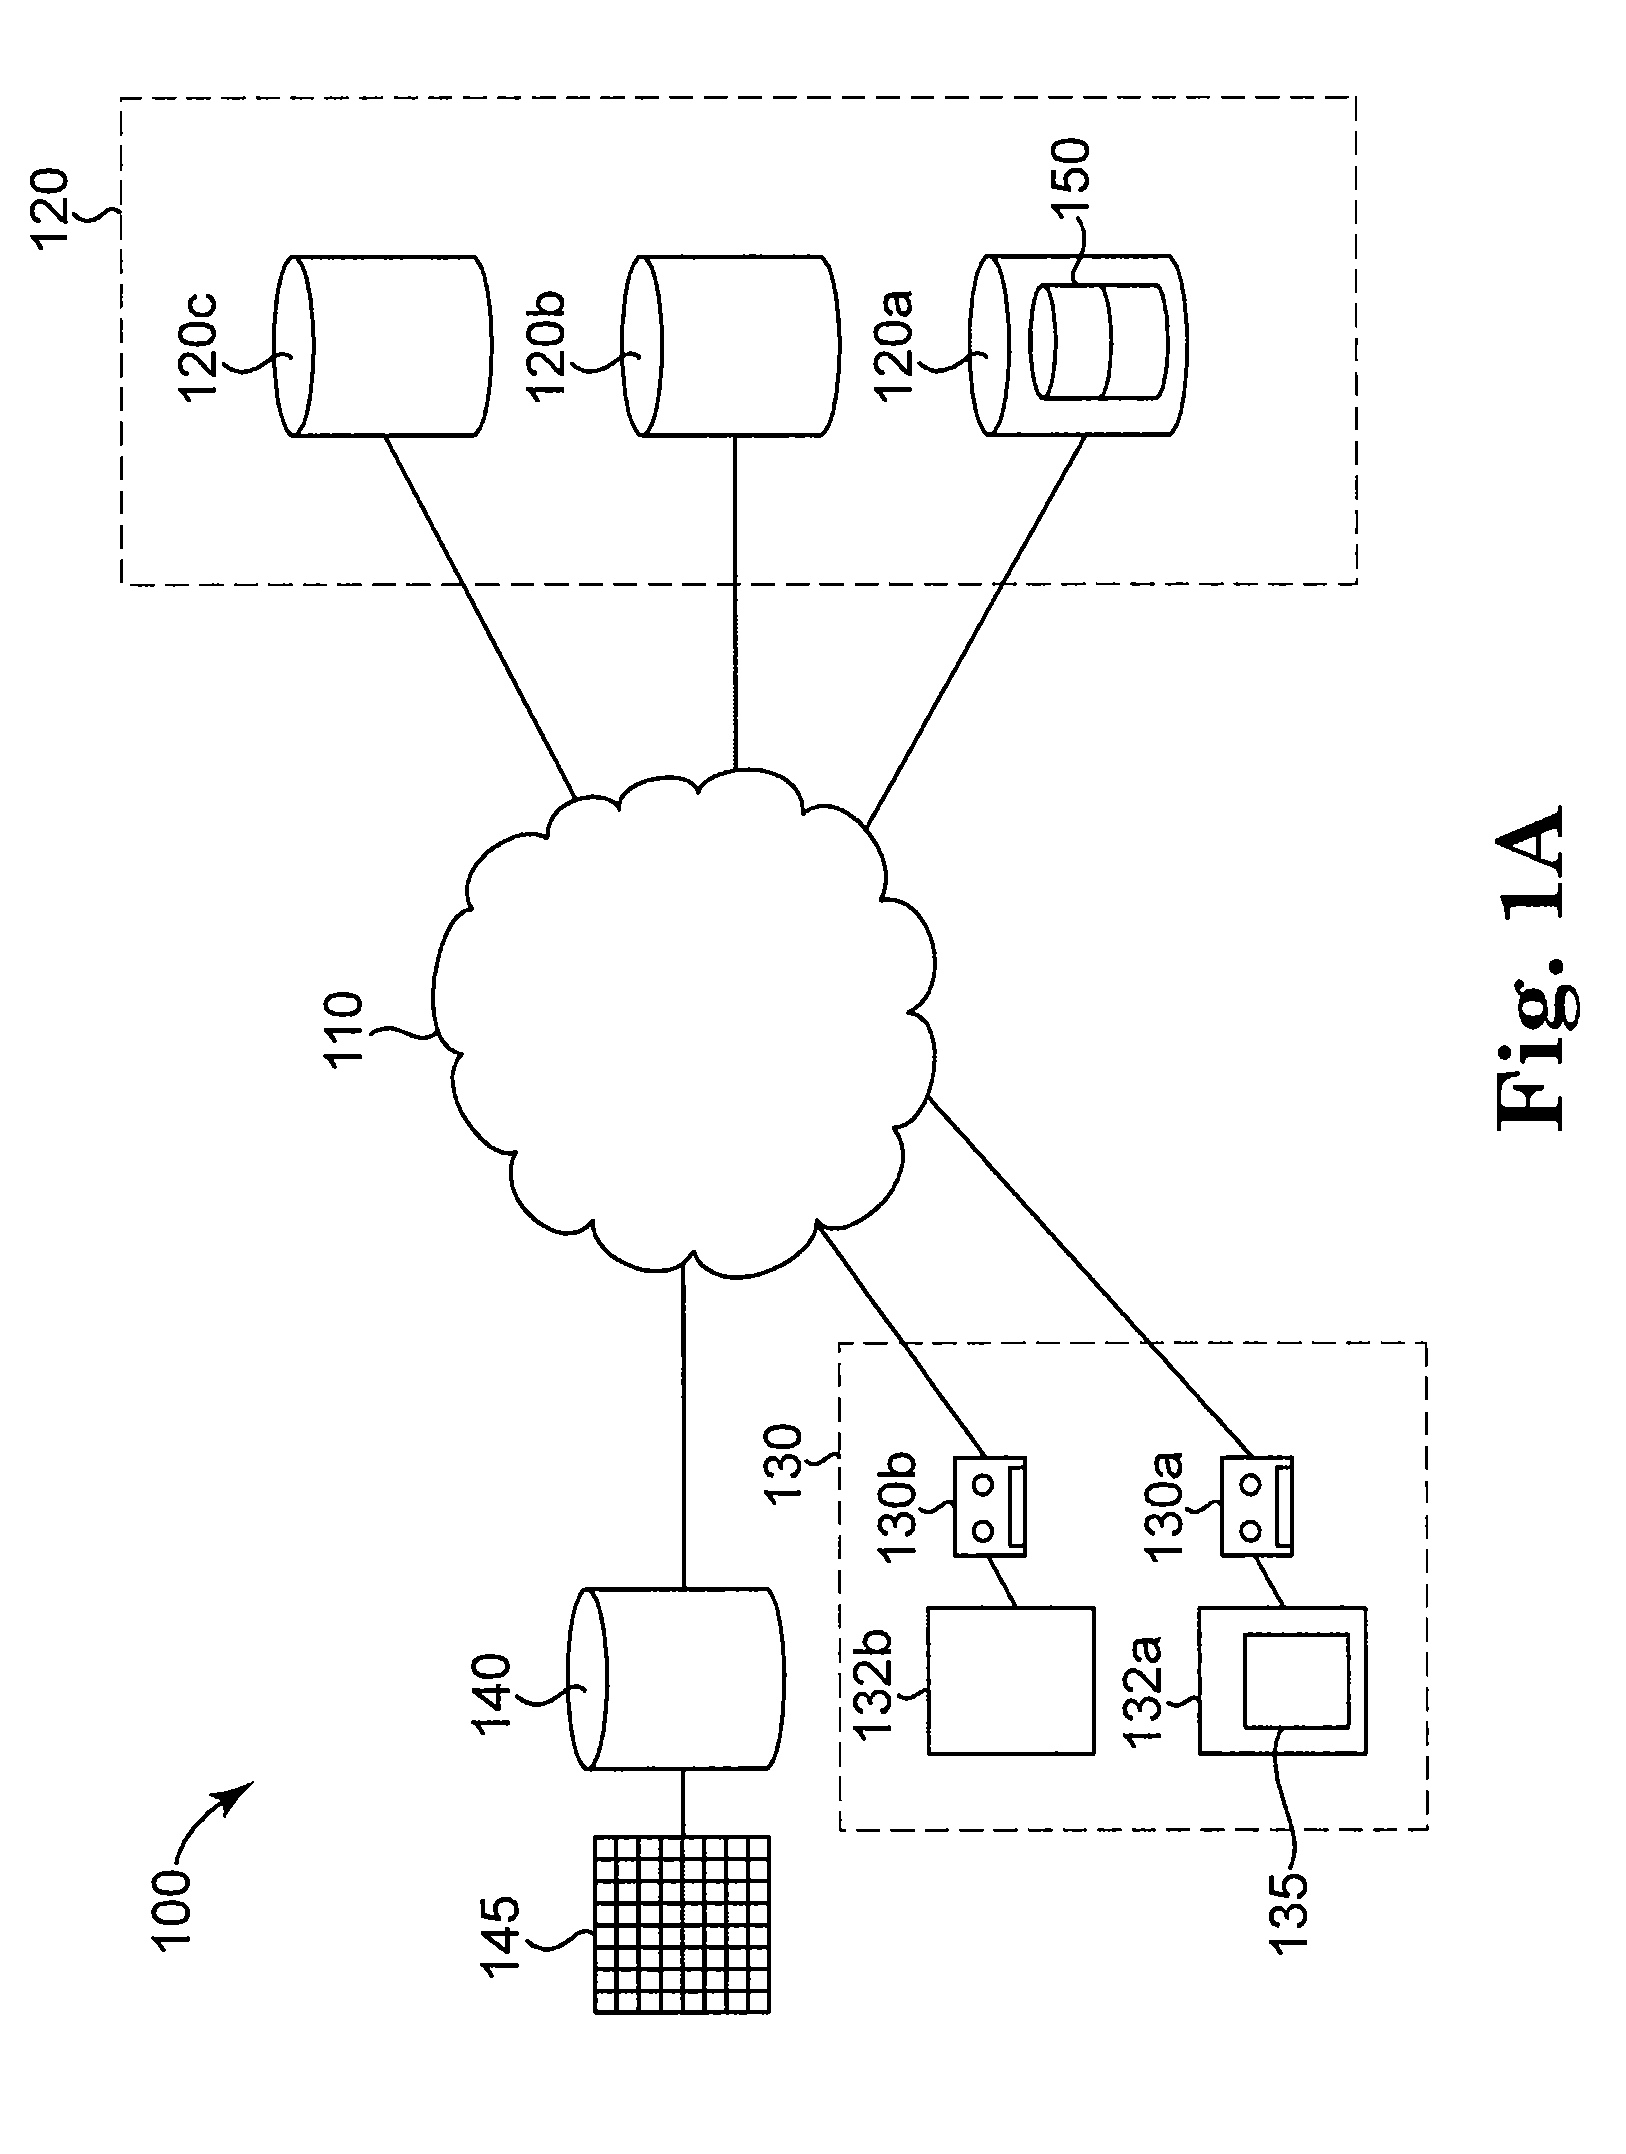 Enhanced method and system for assuring integrity of deduplicated data